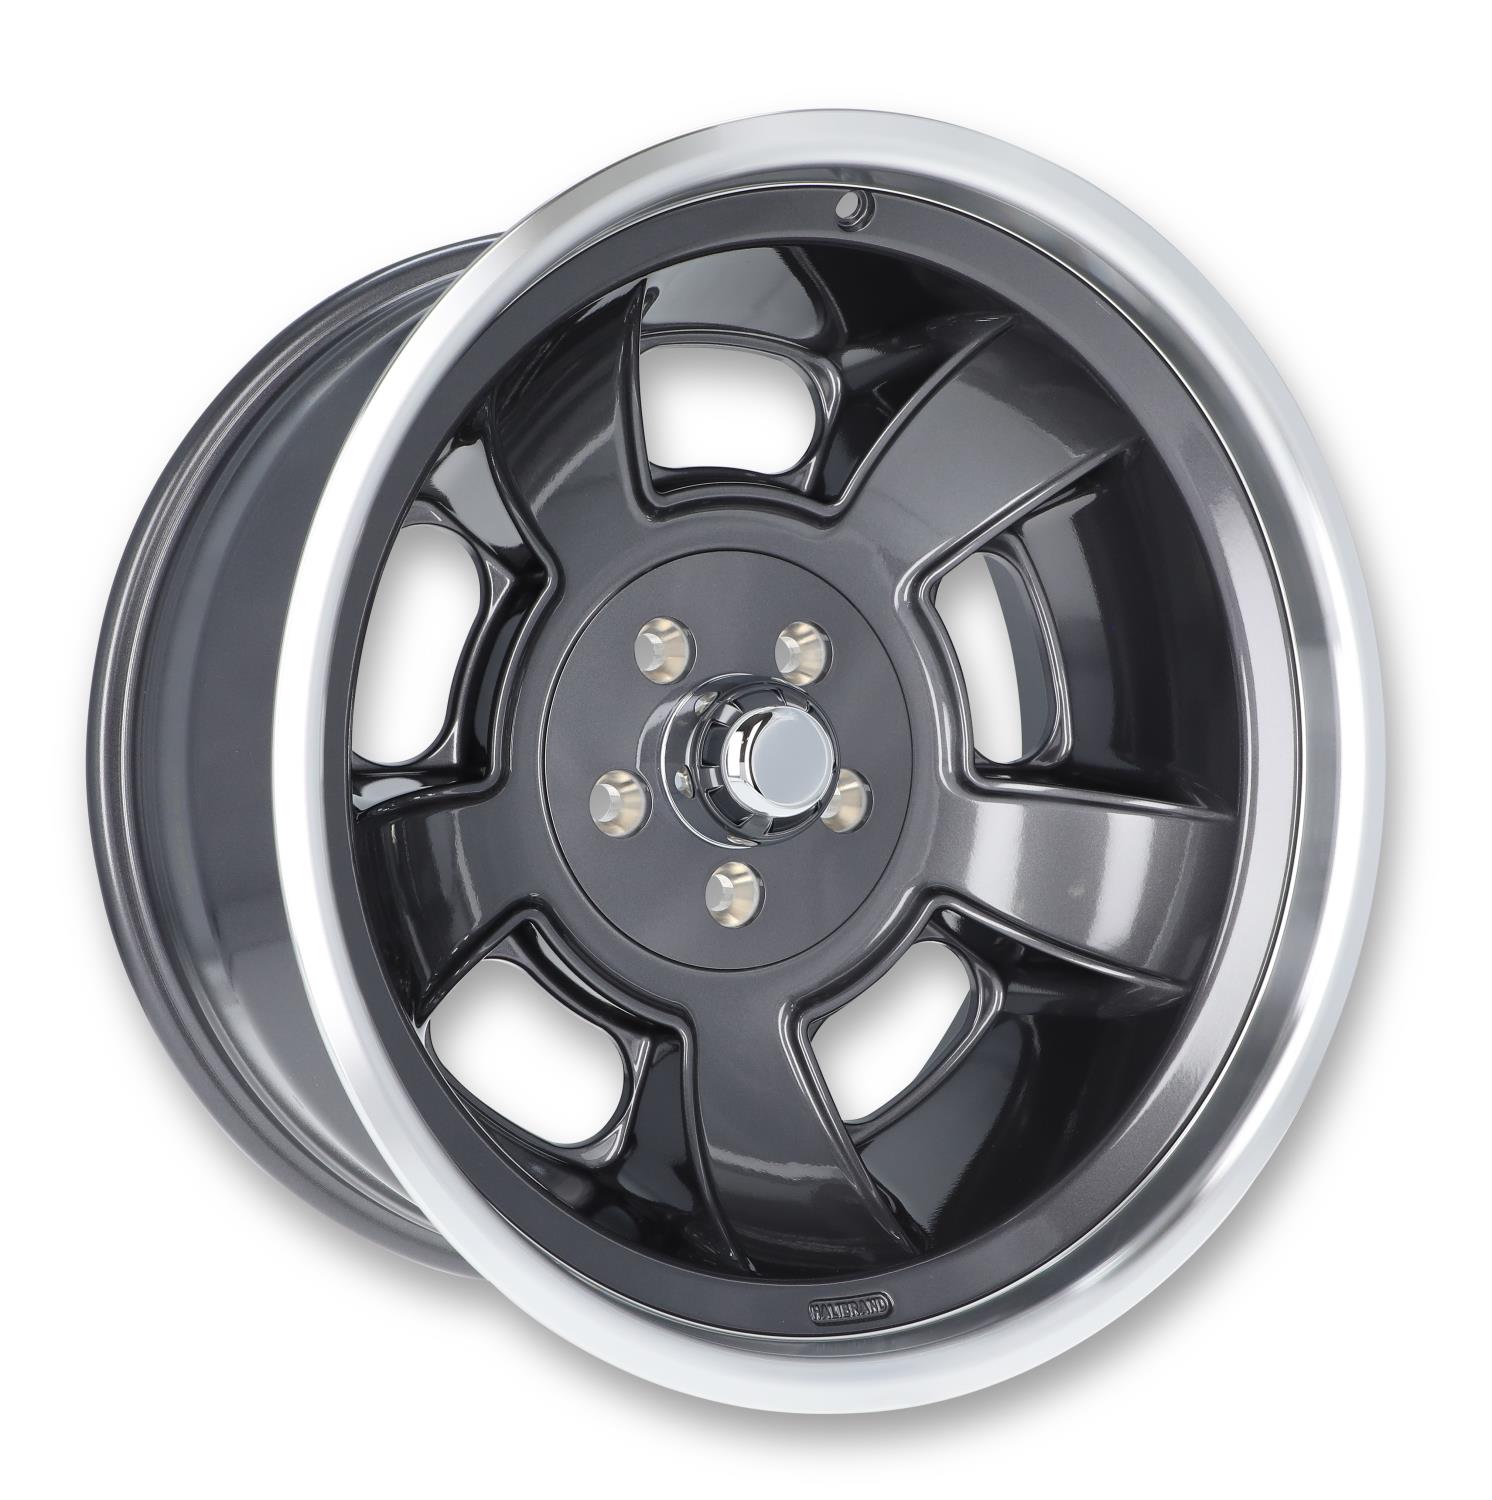 Sprint Rear Wheel, Size: 20x10", Bolt Pattern: 5x5", Backspace: 4" [Anthracite with Machined Lip - Gloss Clearcoat]